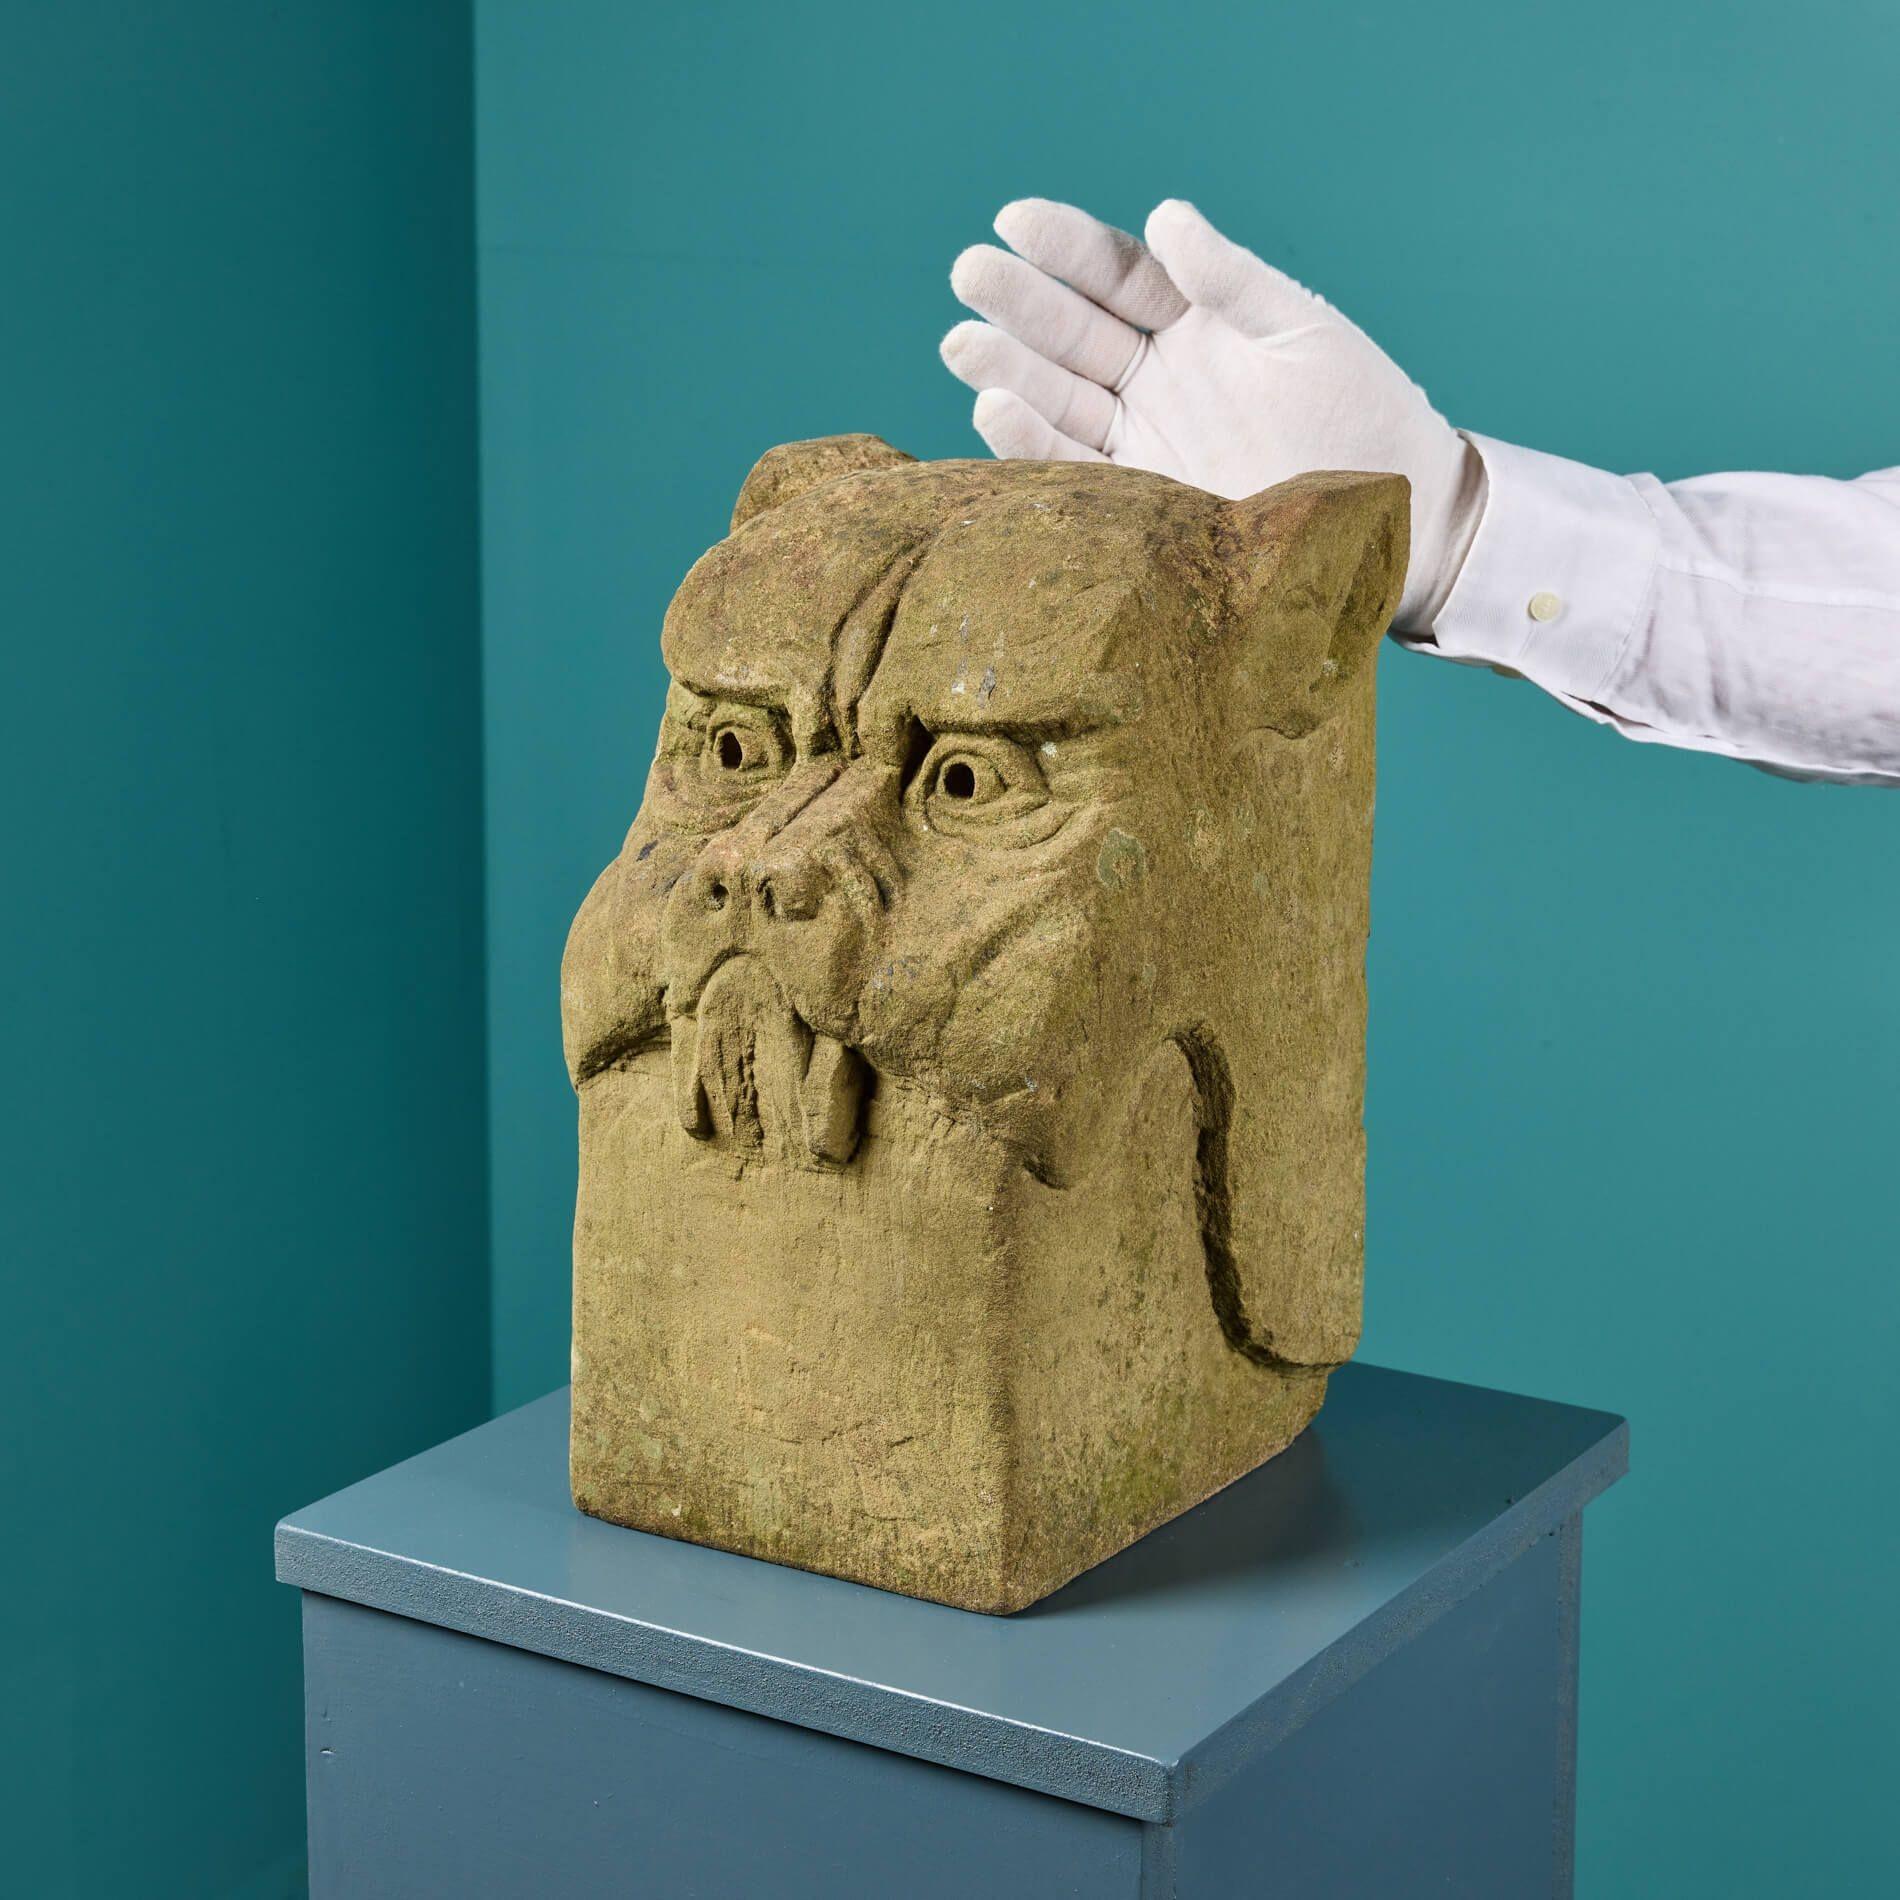 A stylised dog gargoyle statue expressively carved into York stone. Dating from the late 19th / early 20th centuries, this dog head is over 120 years old and as such has a naturally weathered surface that only time can create, while the deeply